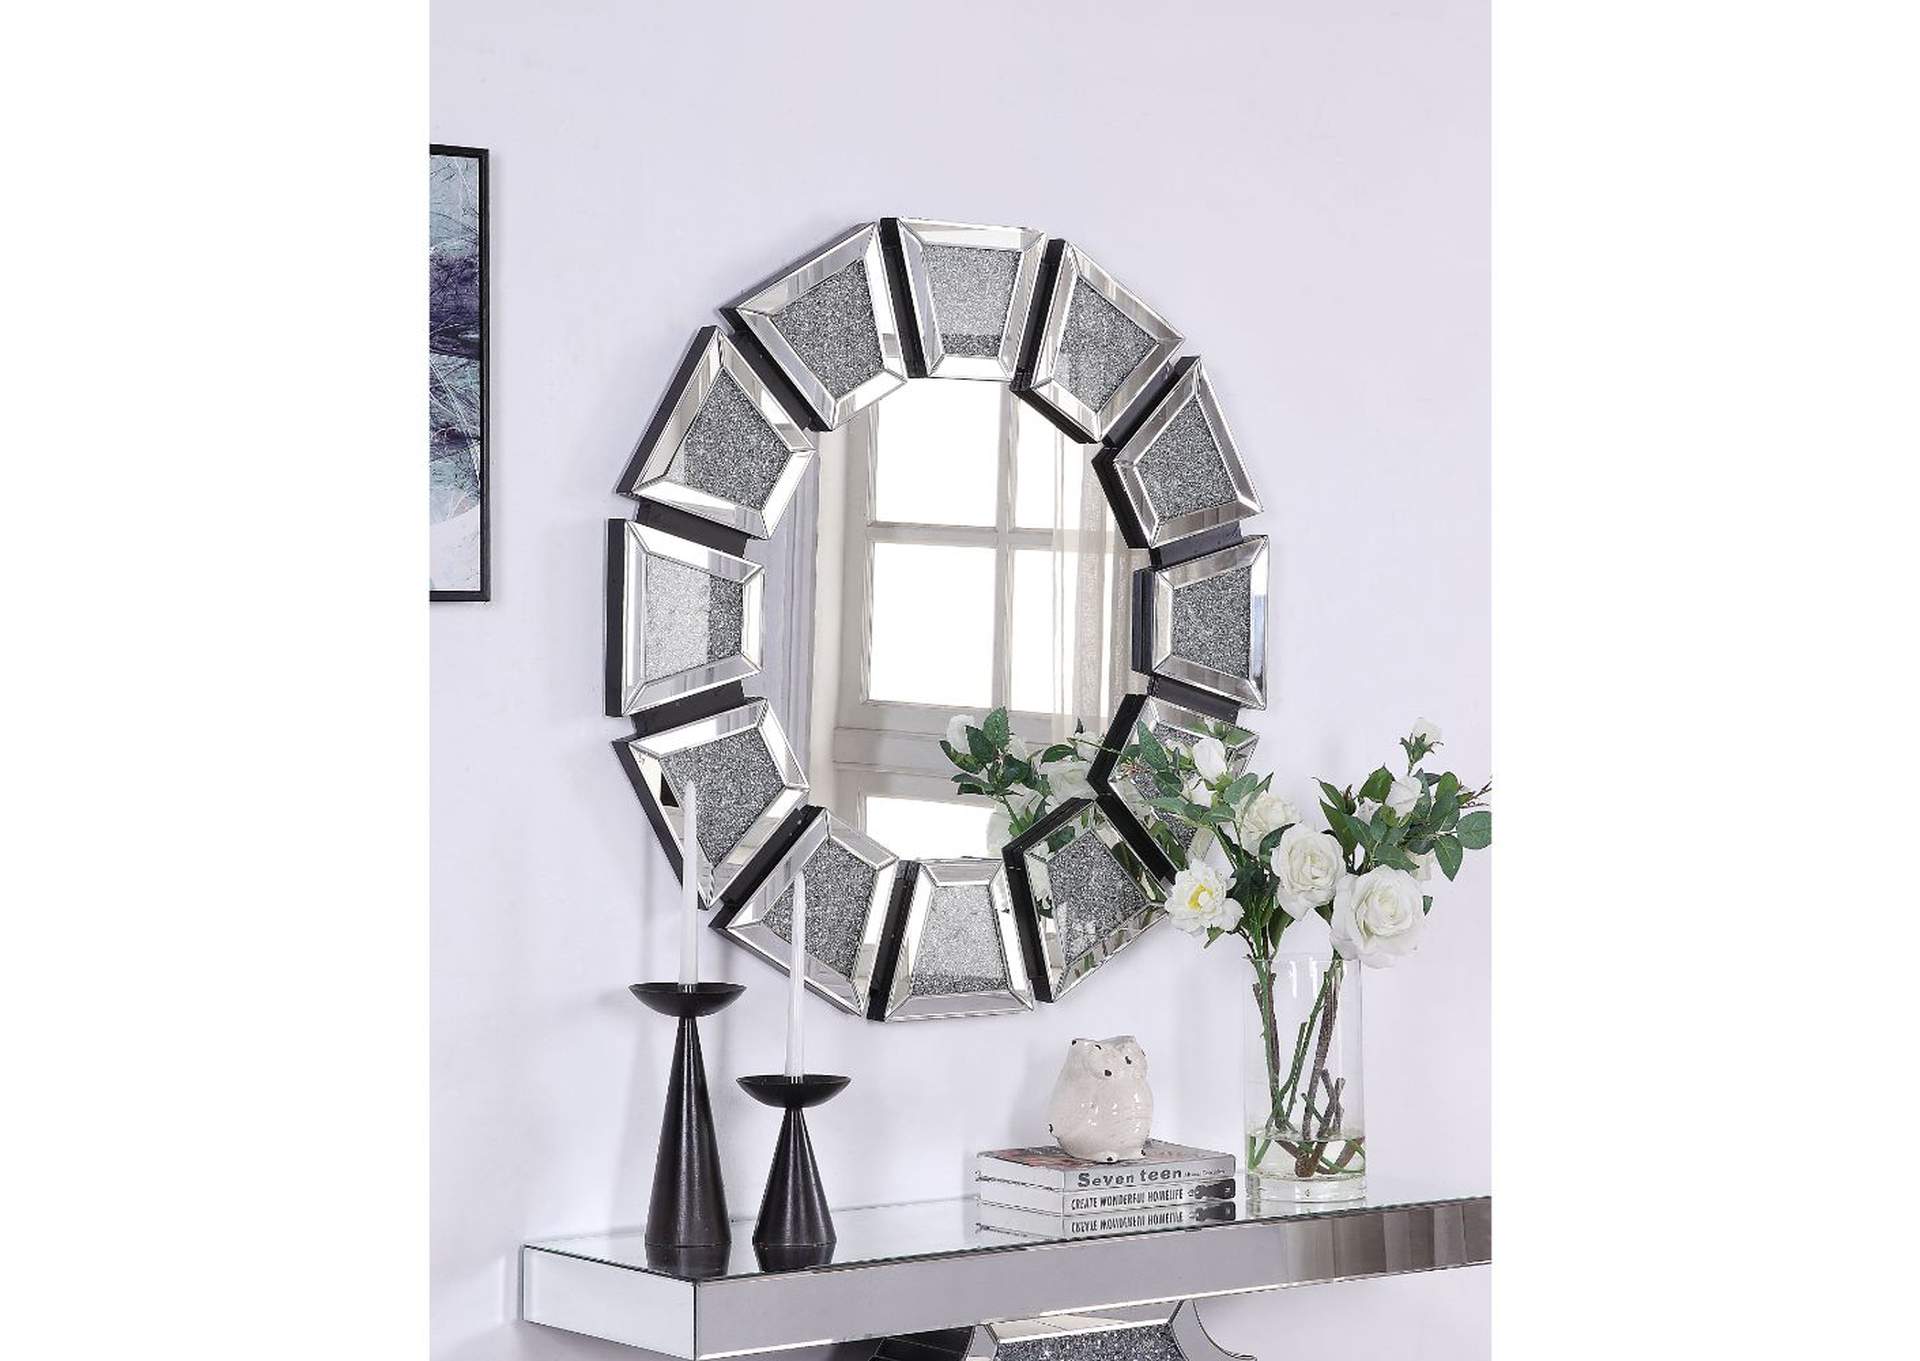 Nowles Mirrored & Faux Stones Wall Decor,Acme